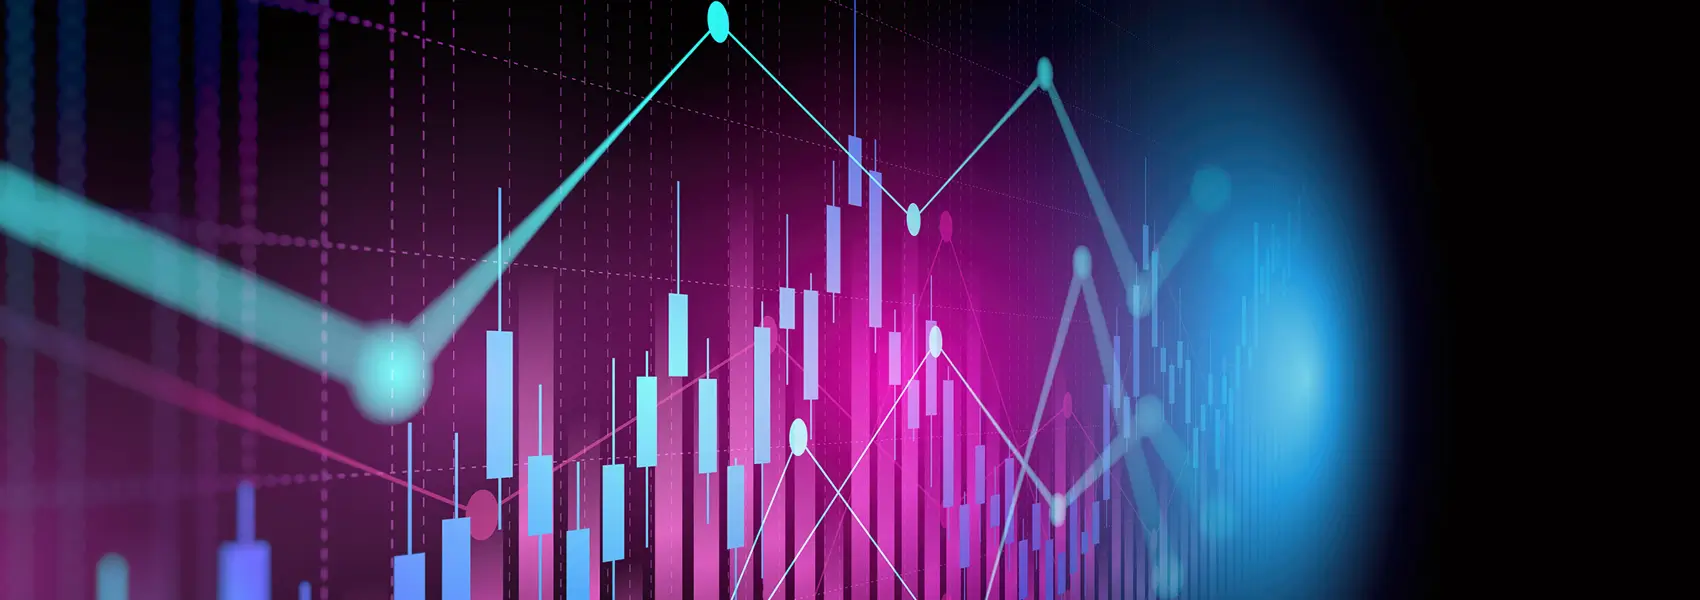 An abstract background displaying a chart and a bar graph, representing data analysis and visualization.